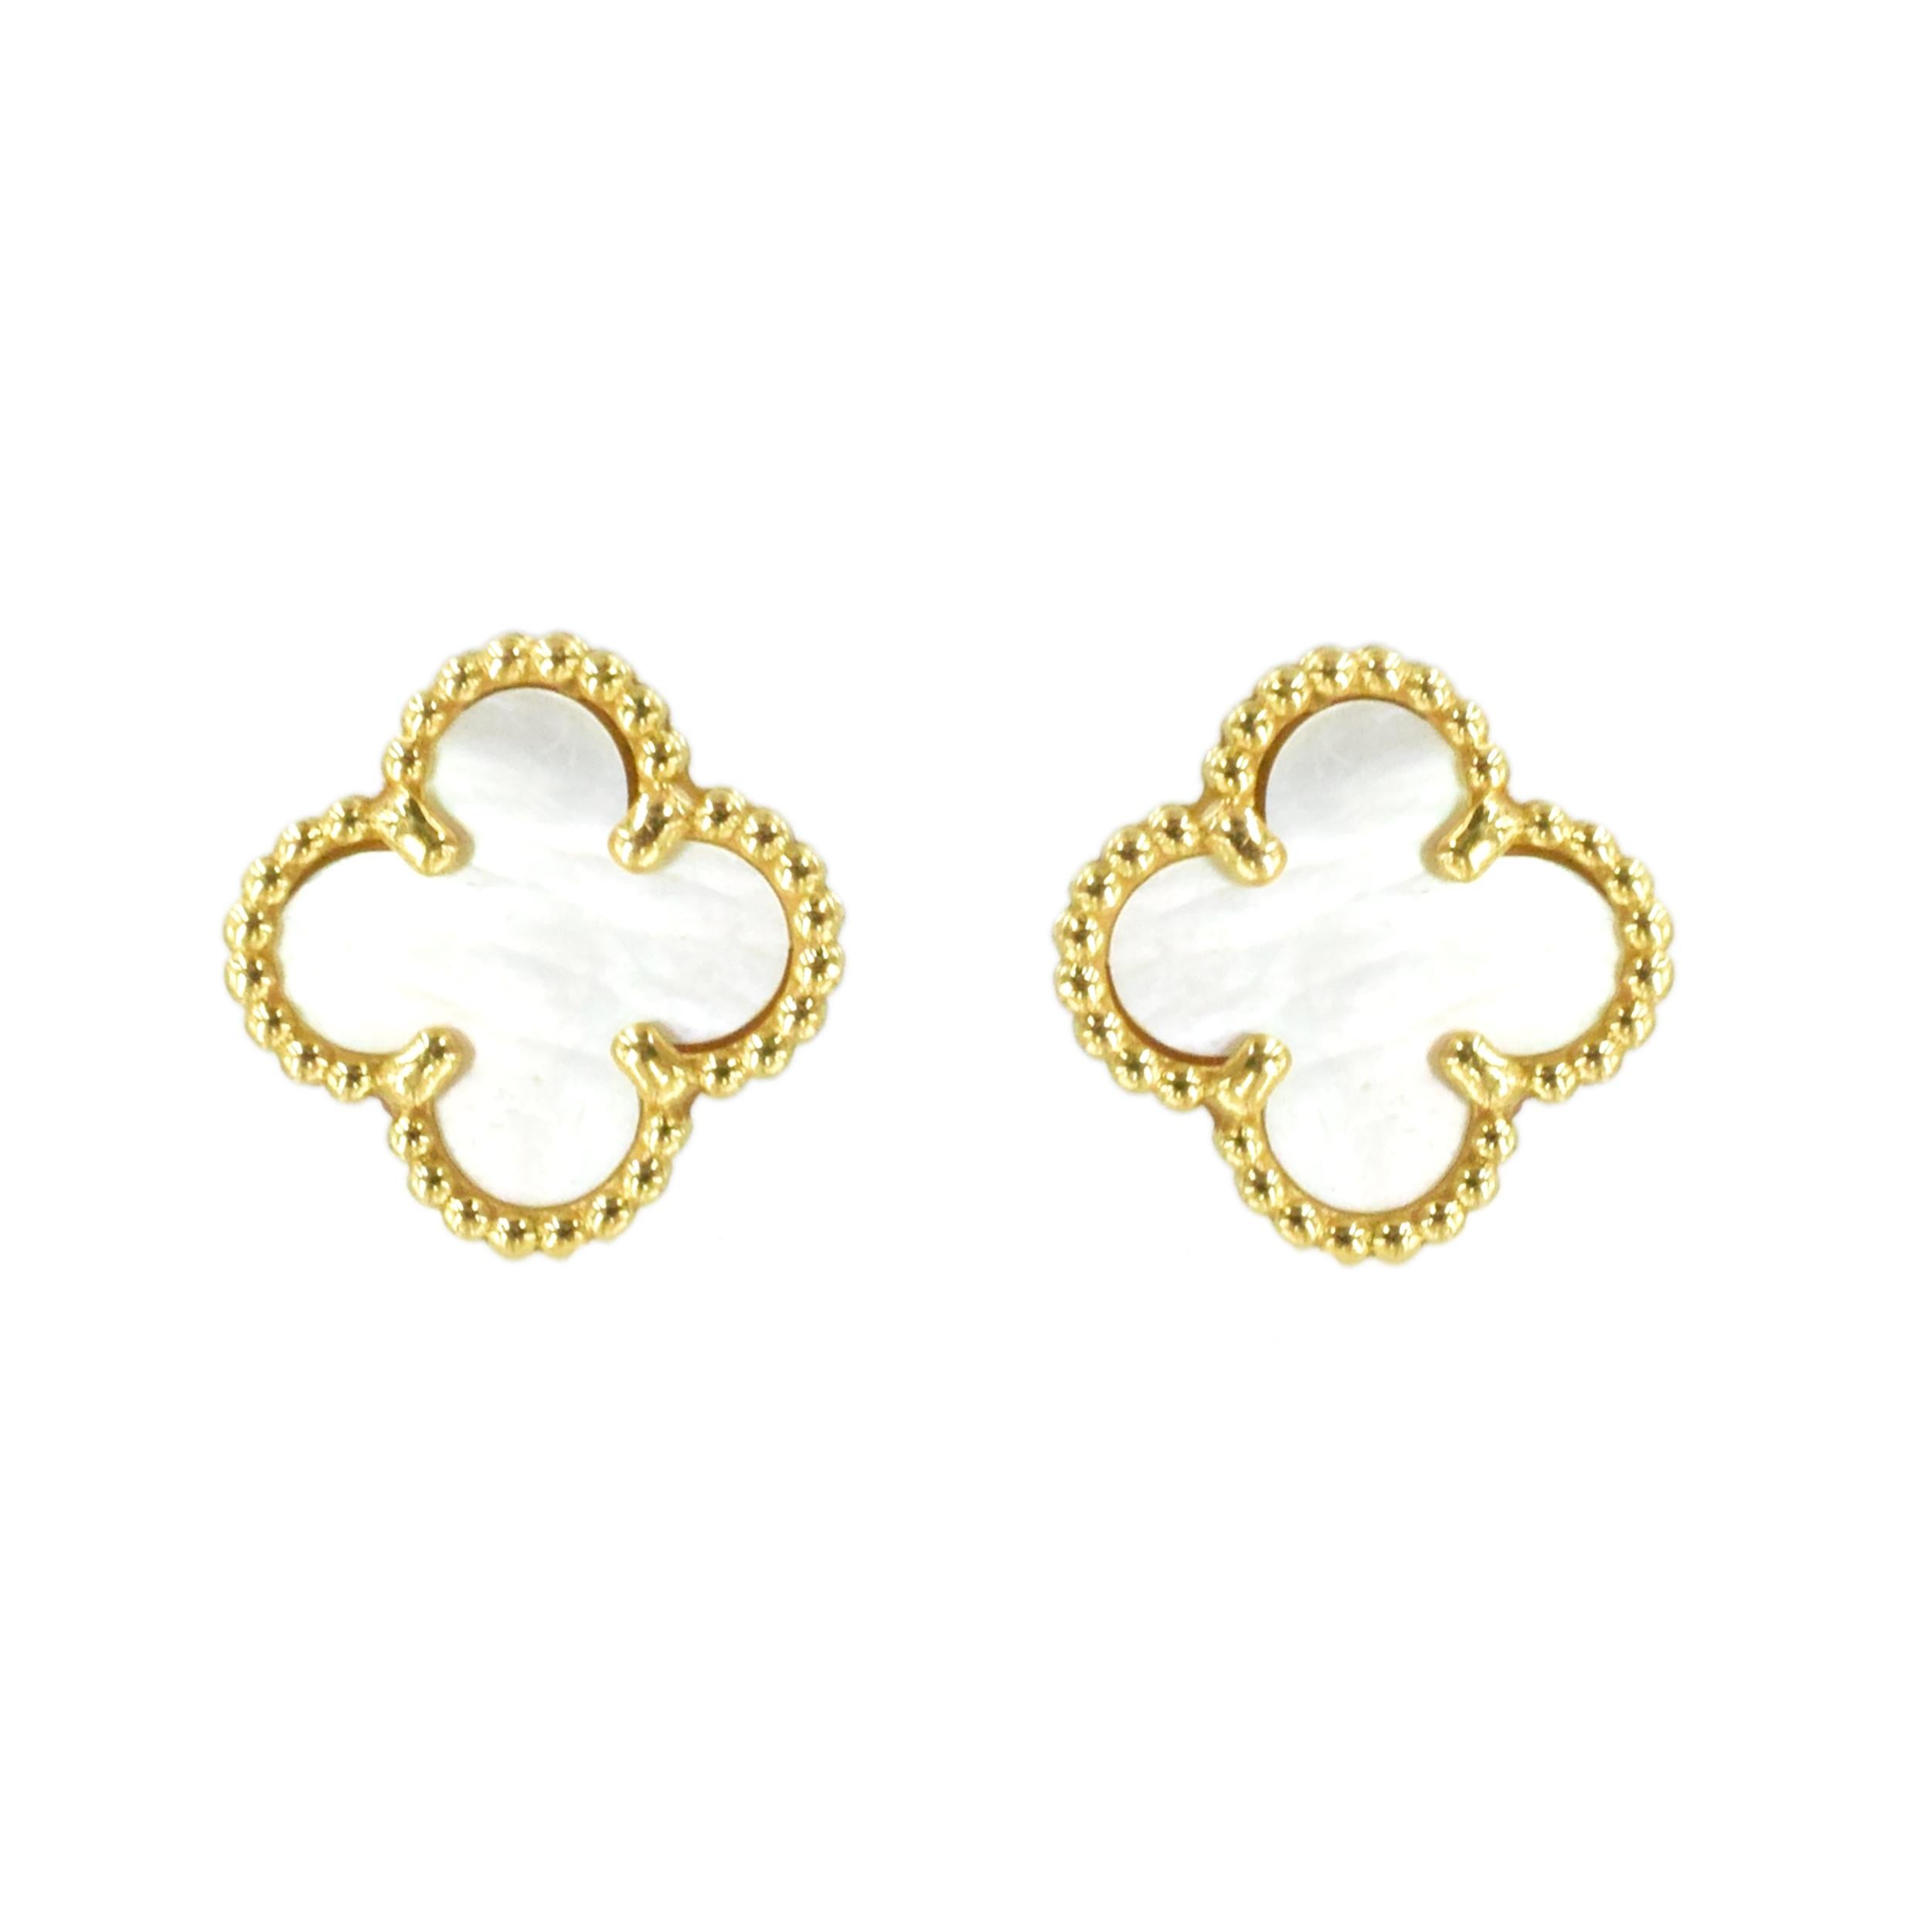 Van Cleef and Arpels Sweet Alhambra ear-stud. The earrings are crafted in
18k yellow gold with center set with white mother of pearl. Diameter: 9mm. Inscribed: VCA,
Au750, JE, 209961. Stamped with makers mark and french hallmark. Equipped with